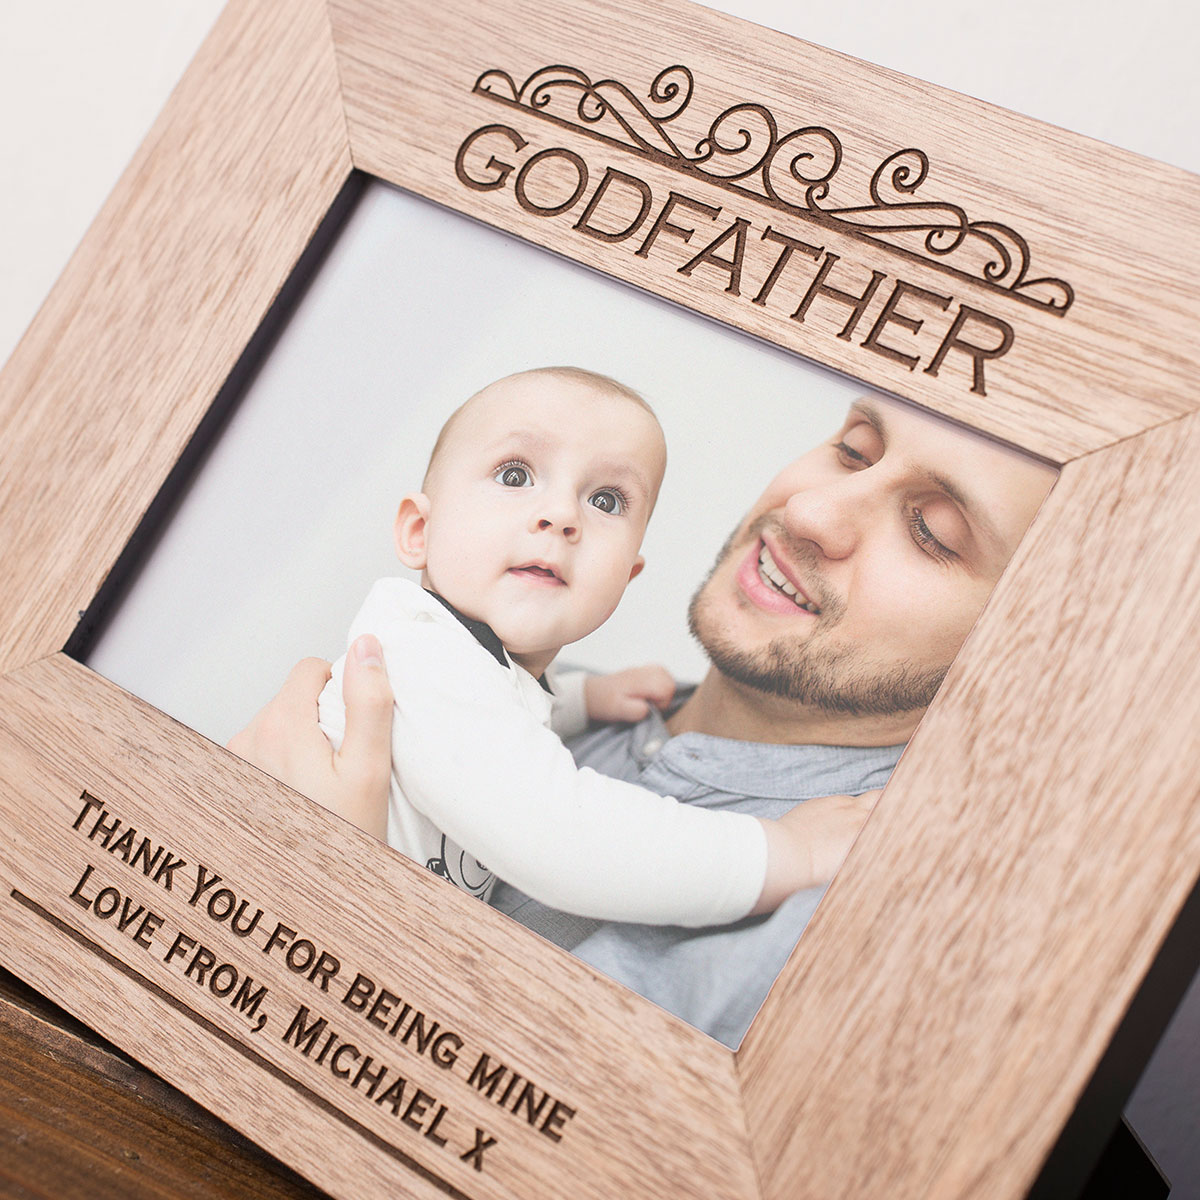 Personalised Engraved Wooden Photo Frame - Godfather